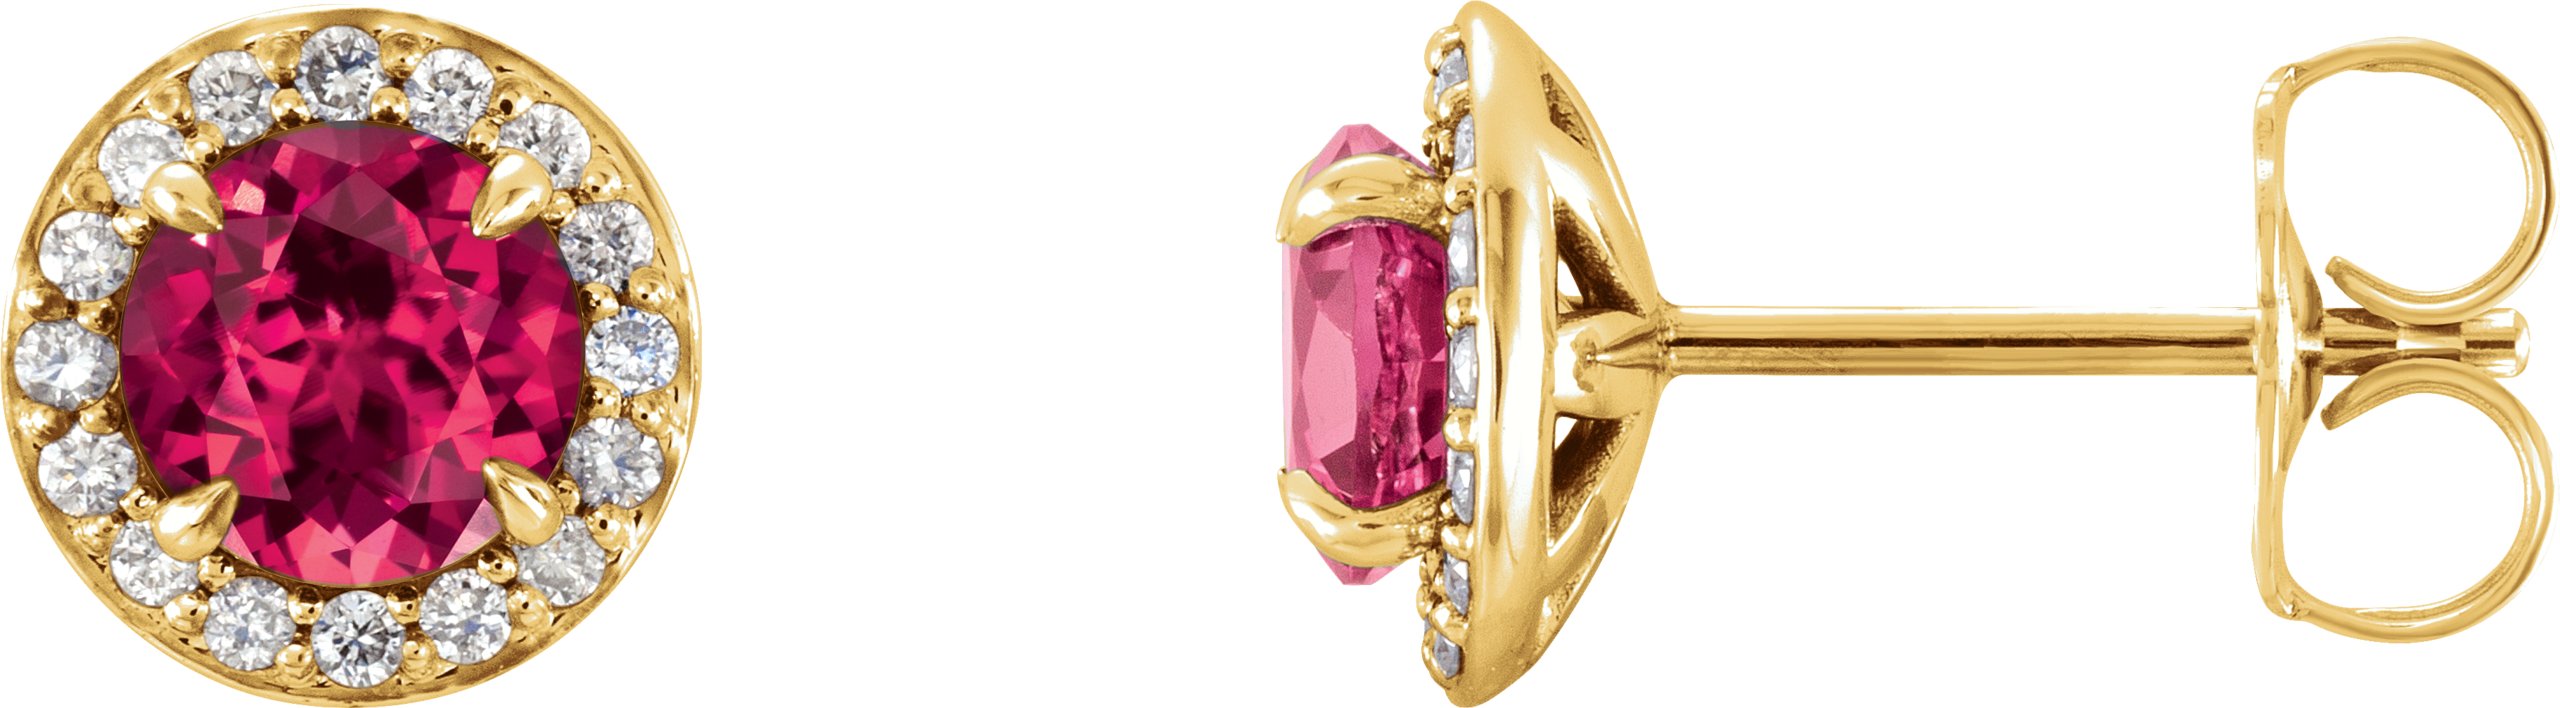 14K Yellow 3.5 mm Round Chatham® Created Ruby & 1/8 CTW Diamond Earrings     